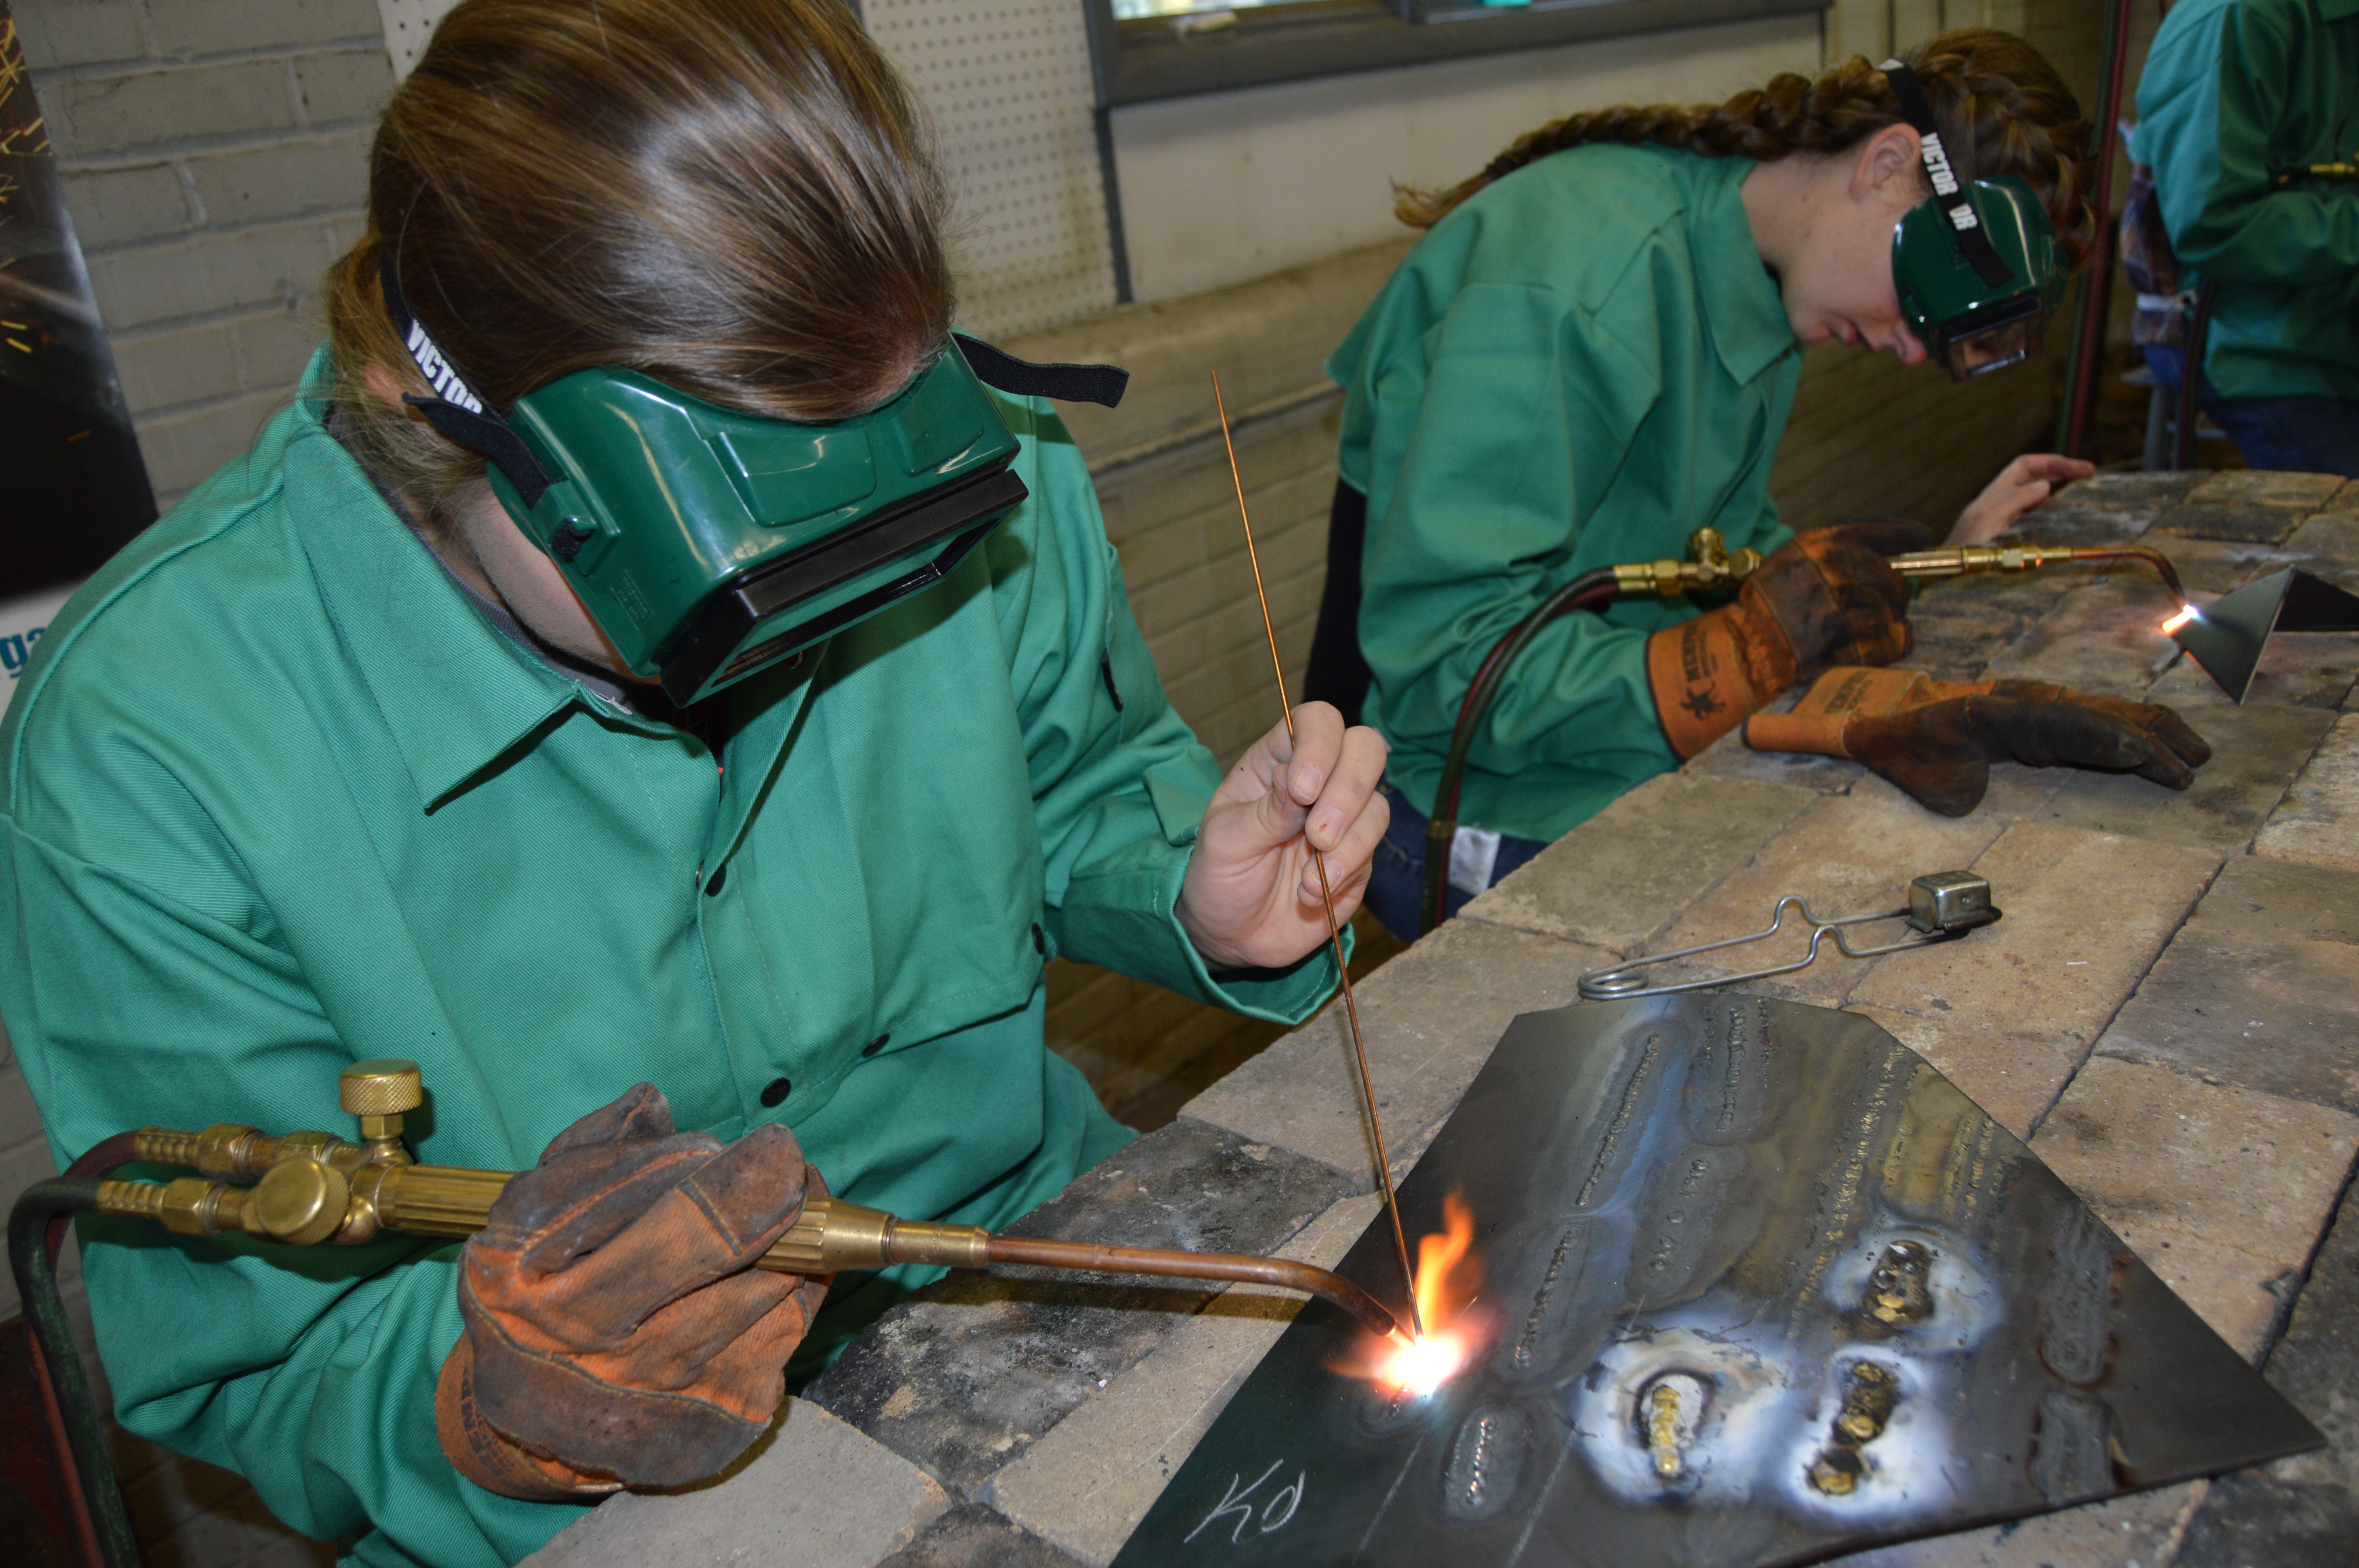 Future agriculture teachers and welding technicians test their brazing skills in the welding program at the Nebraska College of Technical Agriculture. NCTA was named a Top 30 trade school in the U.S. last week. (Crawford/NCTA News)